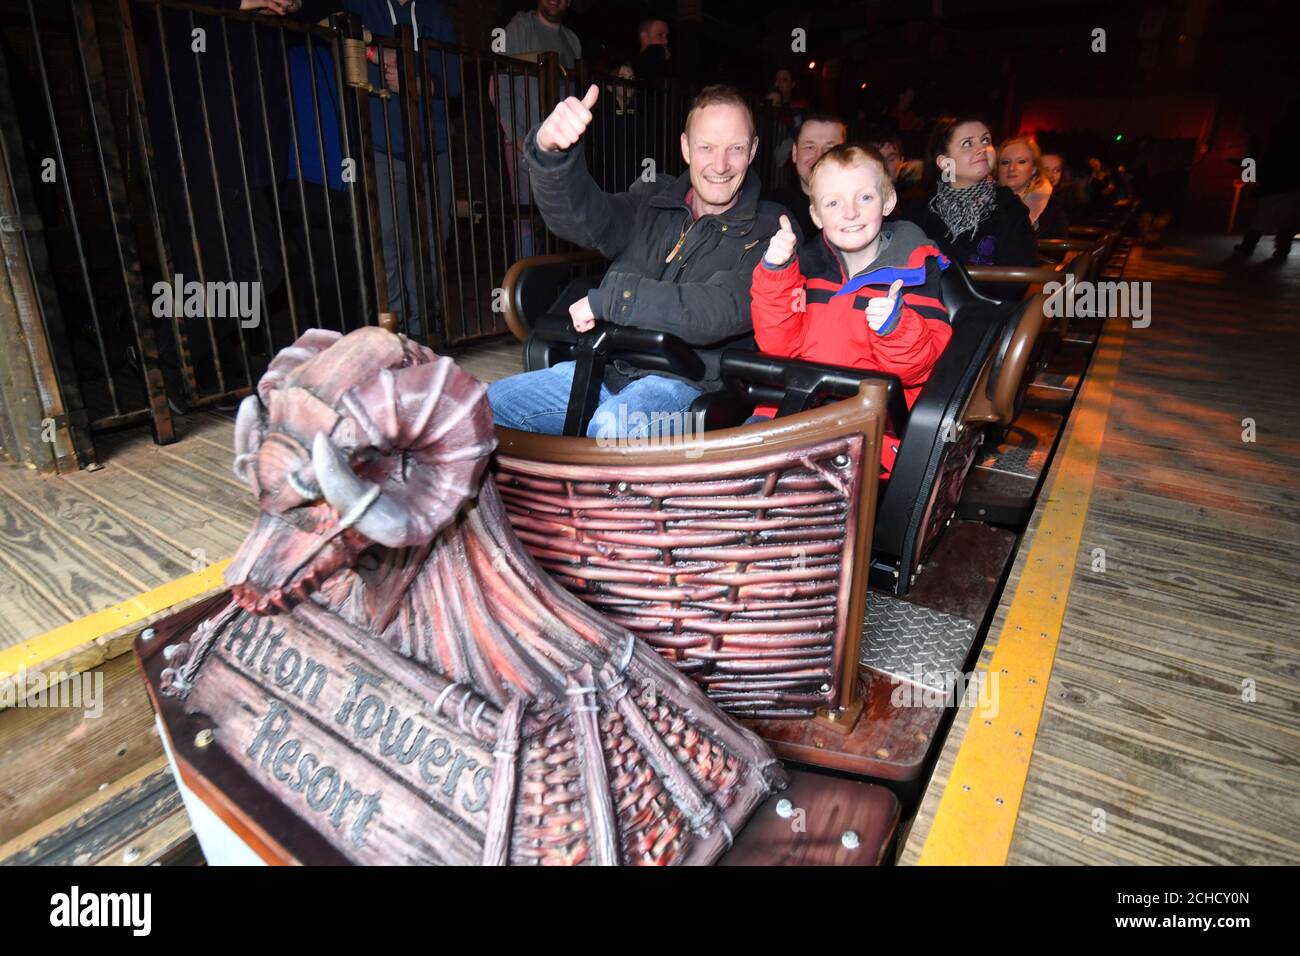 Lucas Betts (10) from Leicester, celebrates becoming the first member of the public to ride the Wicker Man, a wooden rollercoaster which features a six-storey flaming structure, at at Alton Towers Resort in Stoke-on-Trent. Stock Photo